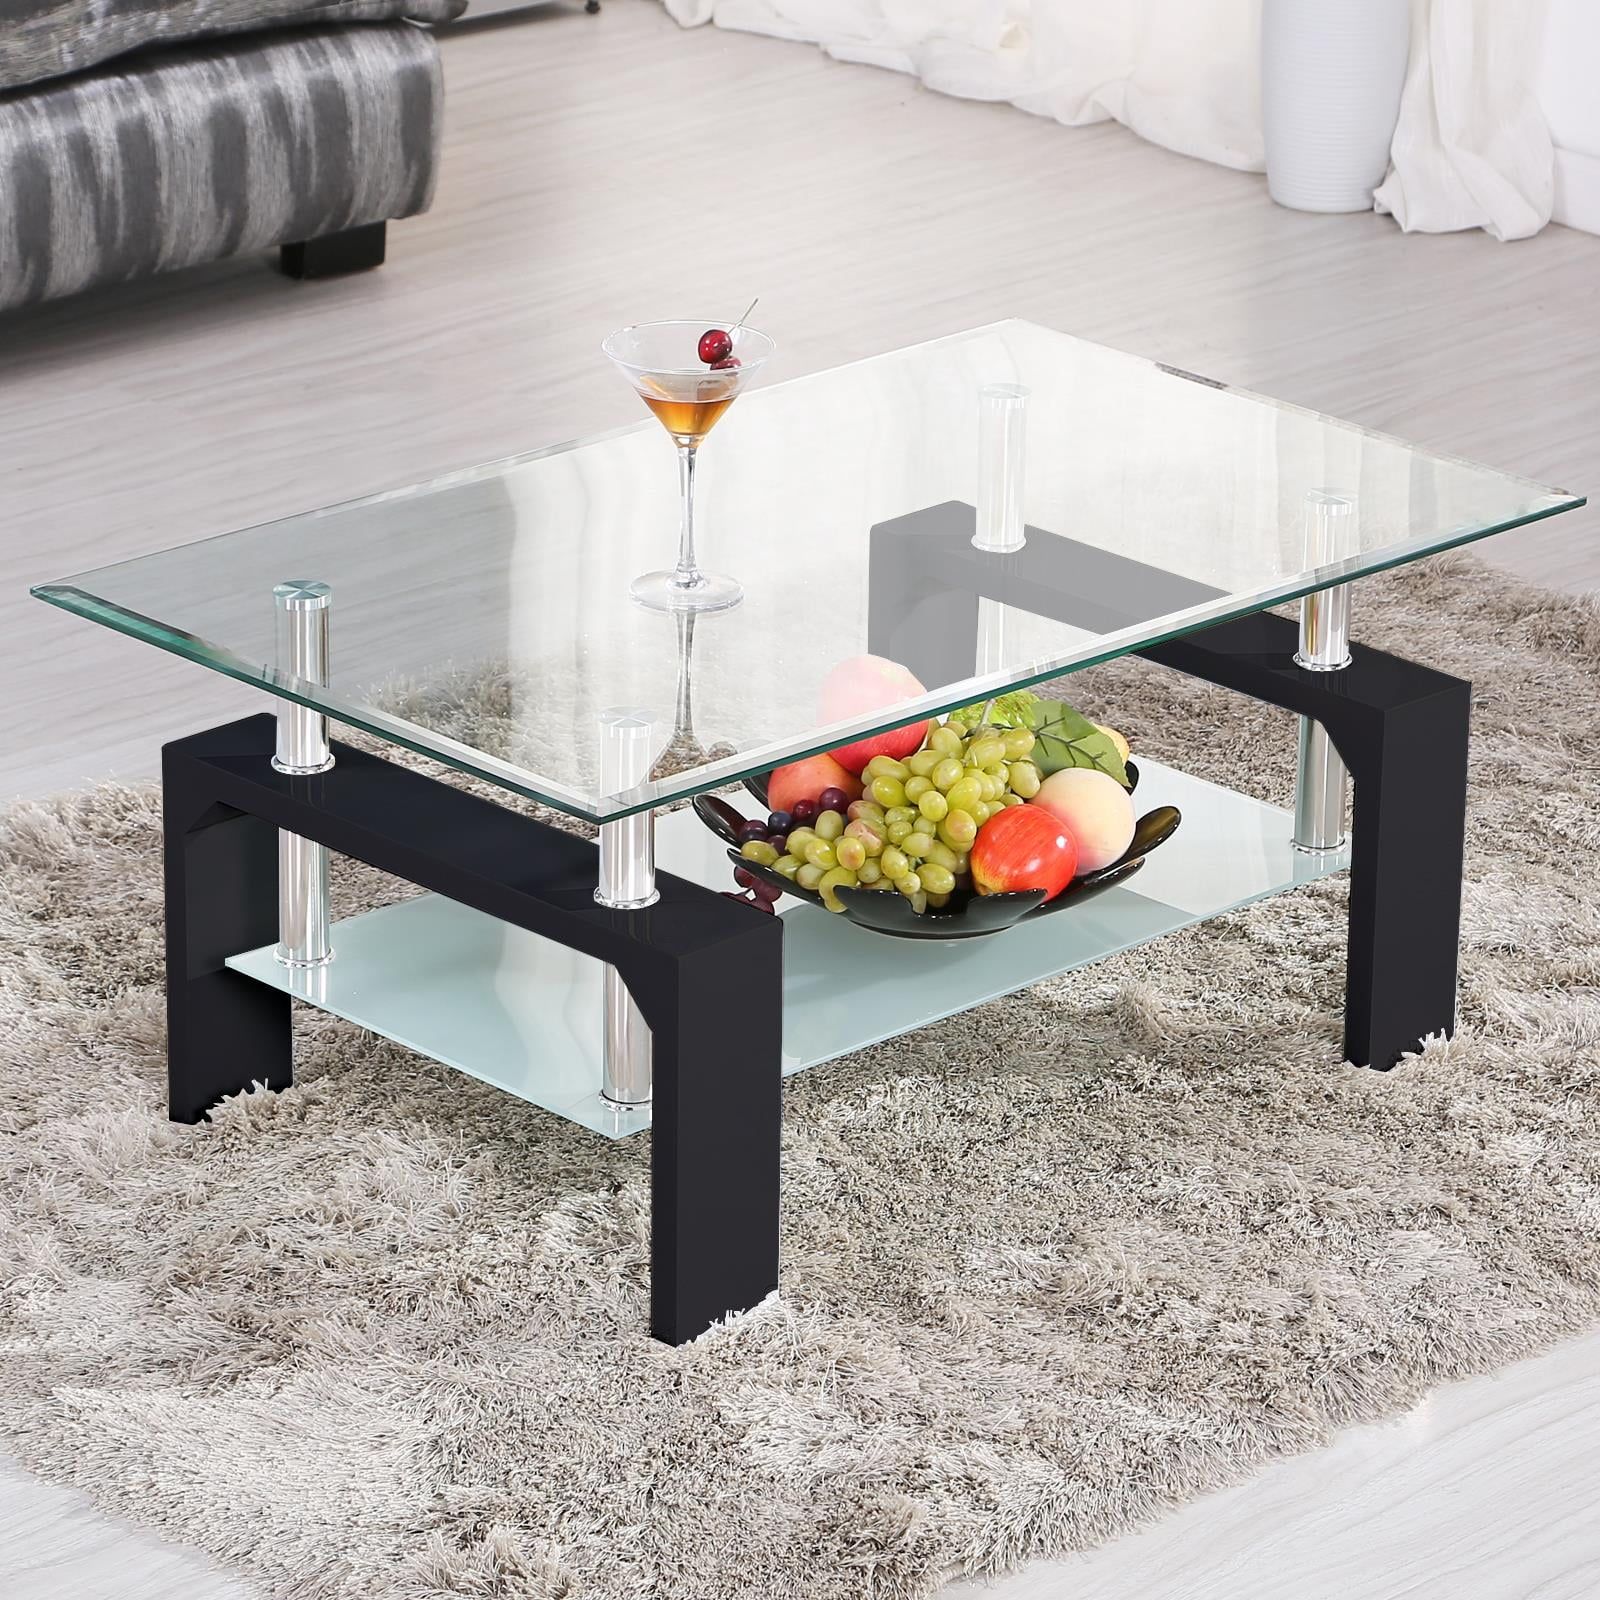 Ktaxon Rectangular Glass Coffee Table Shelf Wood Living Room Furniture Inside Glass Coffee Tables With Lower Shelves (Gallery 7 of 20)